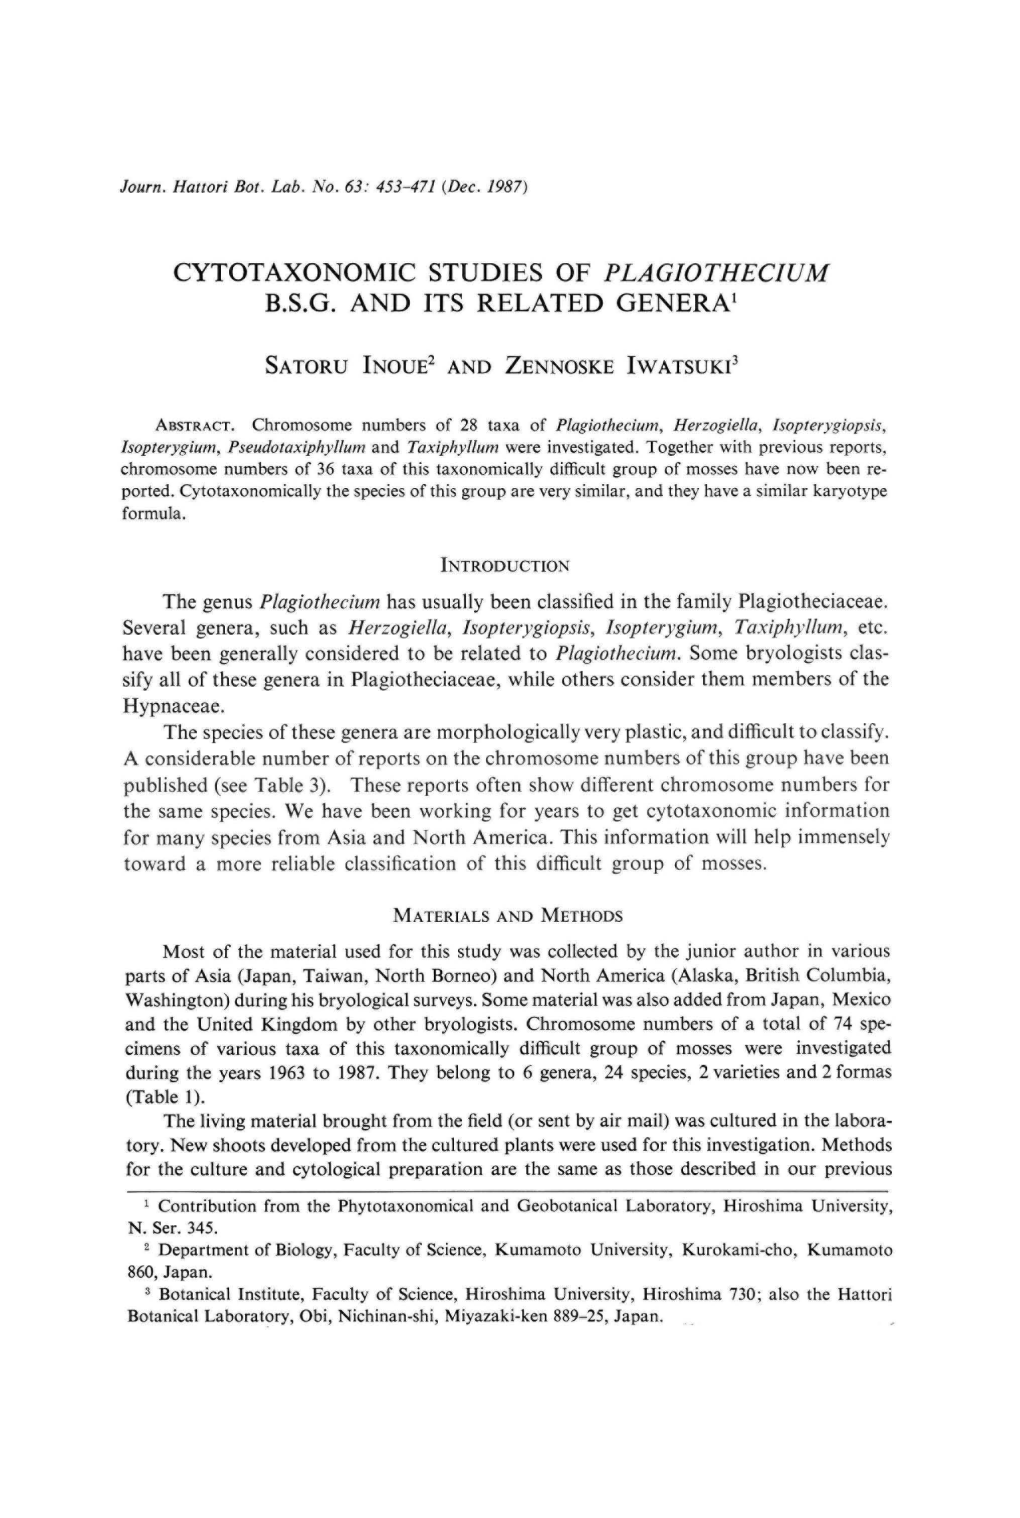 CYTOTAXONOMIC STUDIES of PLAGIOTHECIUM B.S.G. and ITS RELATED General